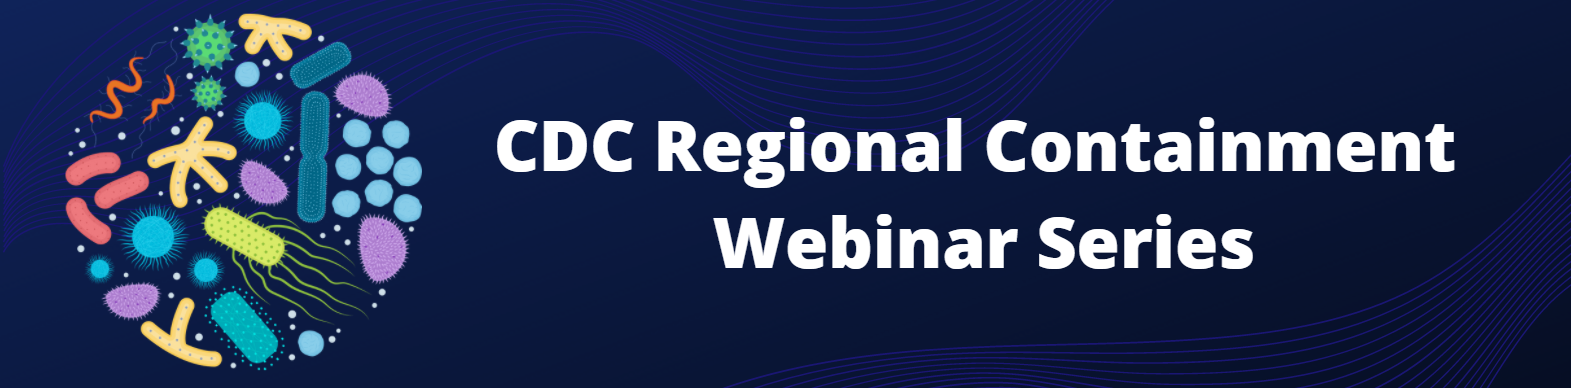 Microbial image and title - CDC Regional Containment Webinar Series